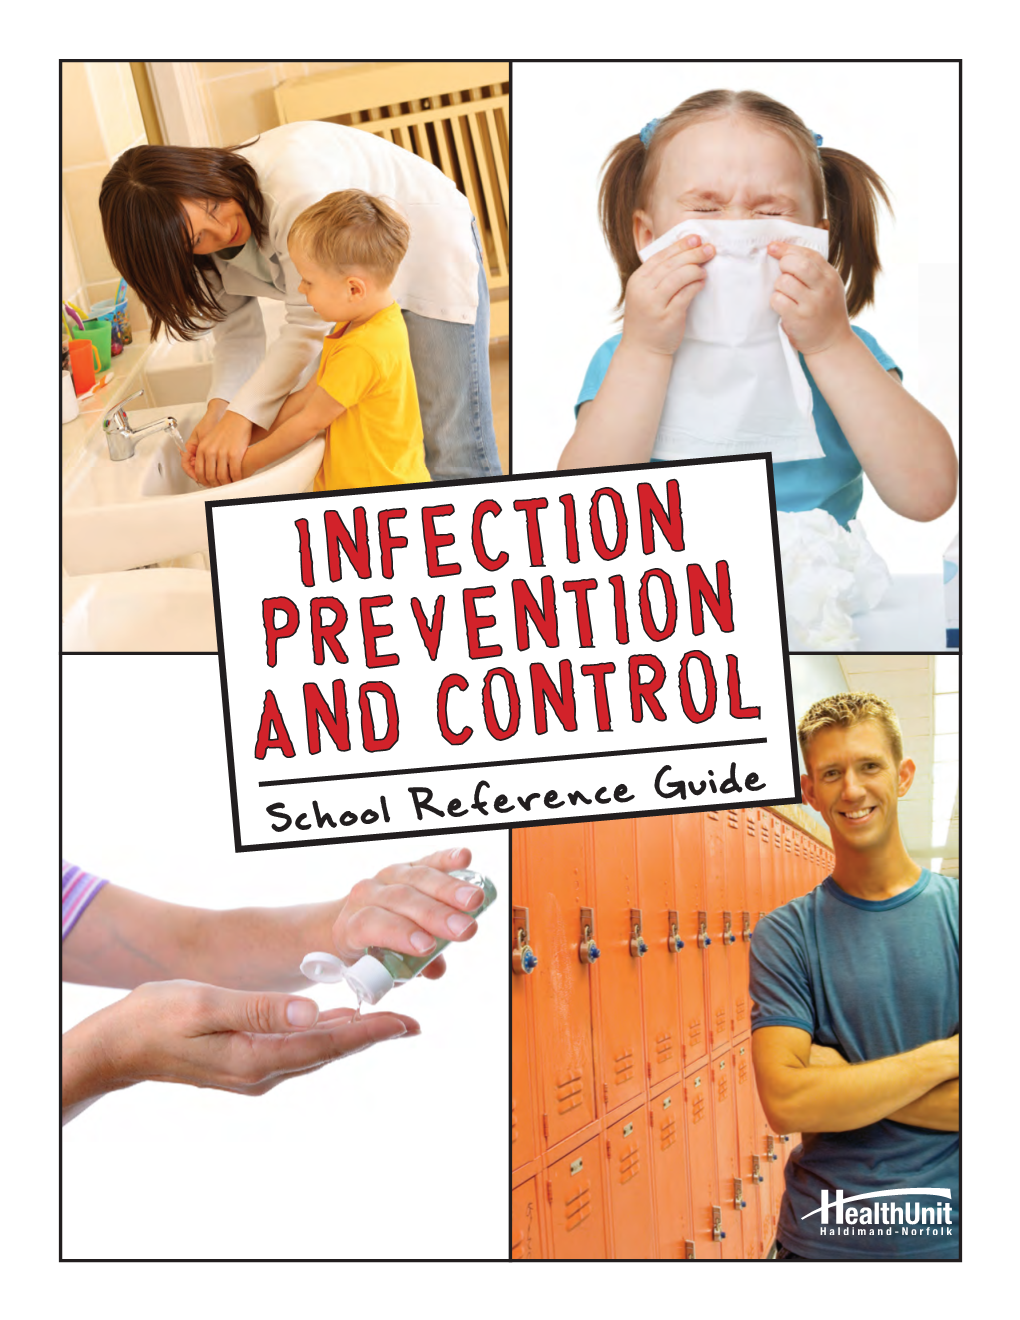 Infection Prevention and Control School Reference Guide HALDIMAND-NORFOLK HEALTH UNIT HEALTHINFO INFECTIOUS DISEASE TEAM Common Childhood Illnesses